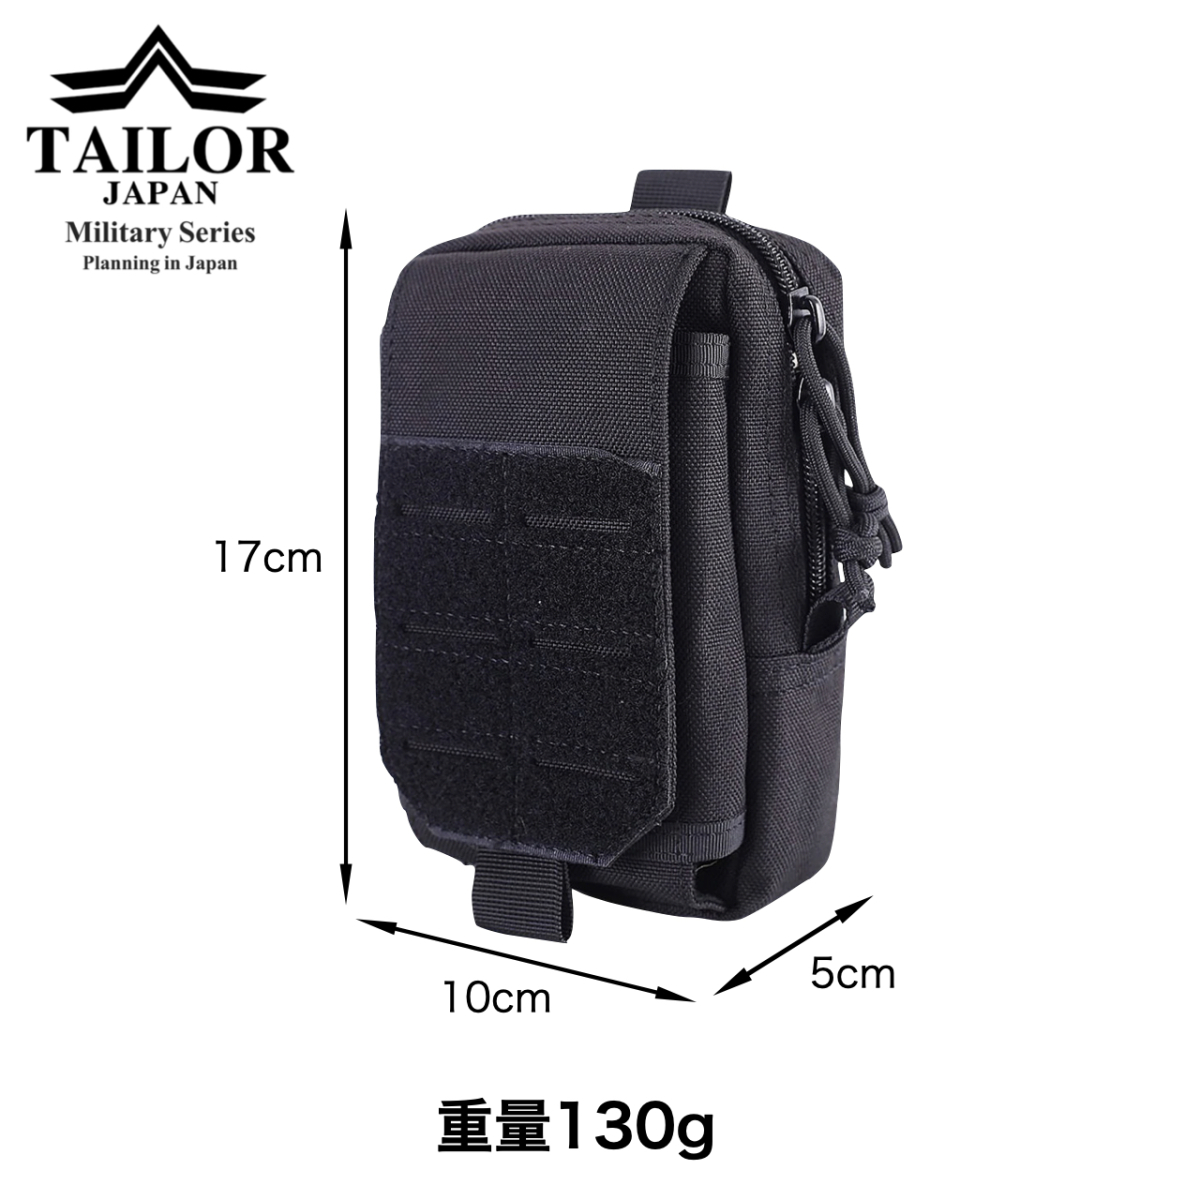 TAILOR JAPAN Taylor Japan Tacty karu pouch military pouch airsoft pouch smartphone airsoft velcro military bag 